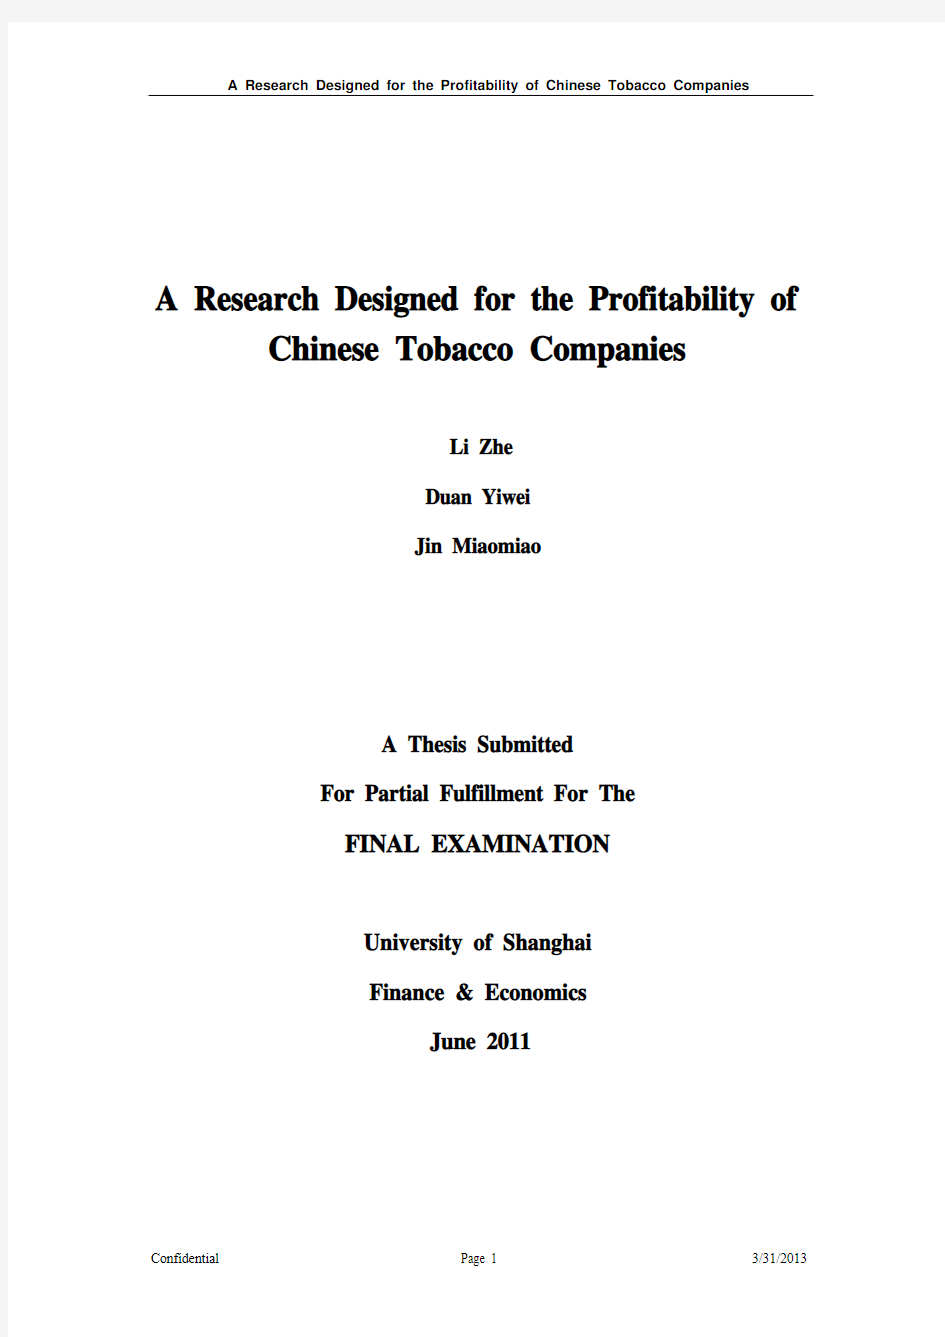 A Research Designed for the Profitability of Chinese Tobacco Companies